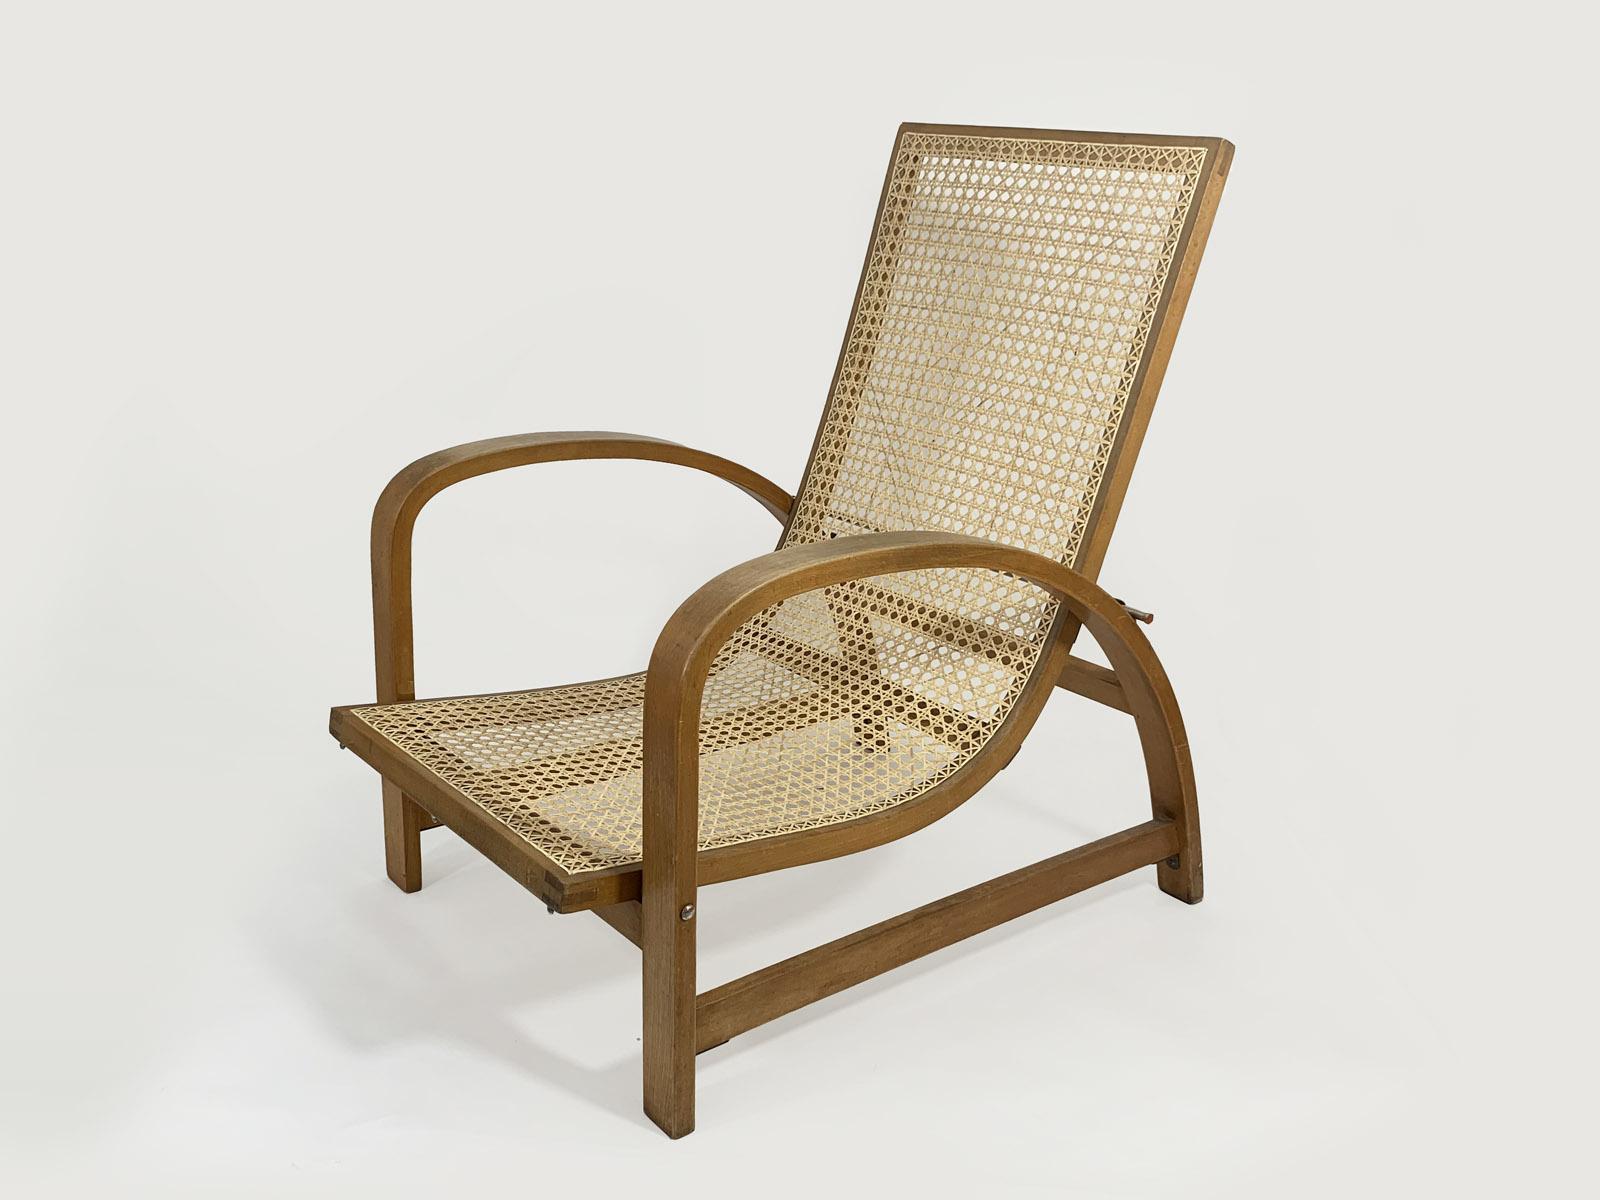 Czech Jindrich Halabala Reclining Chair in Wood and Cane, 1930s For Sale